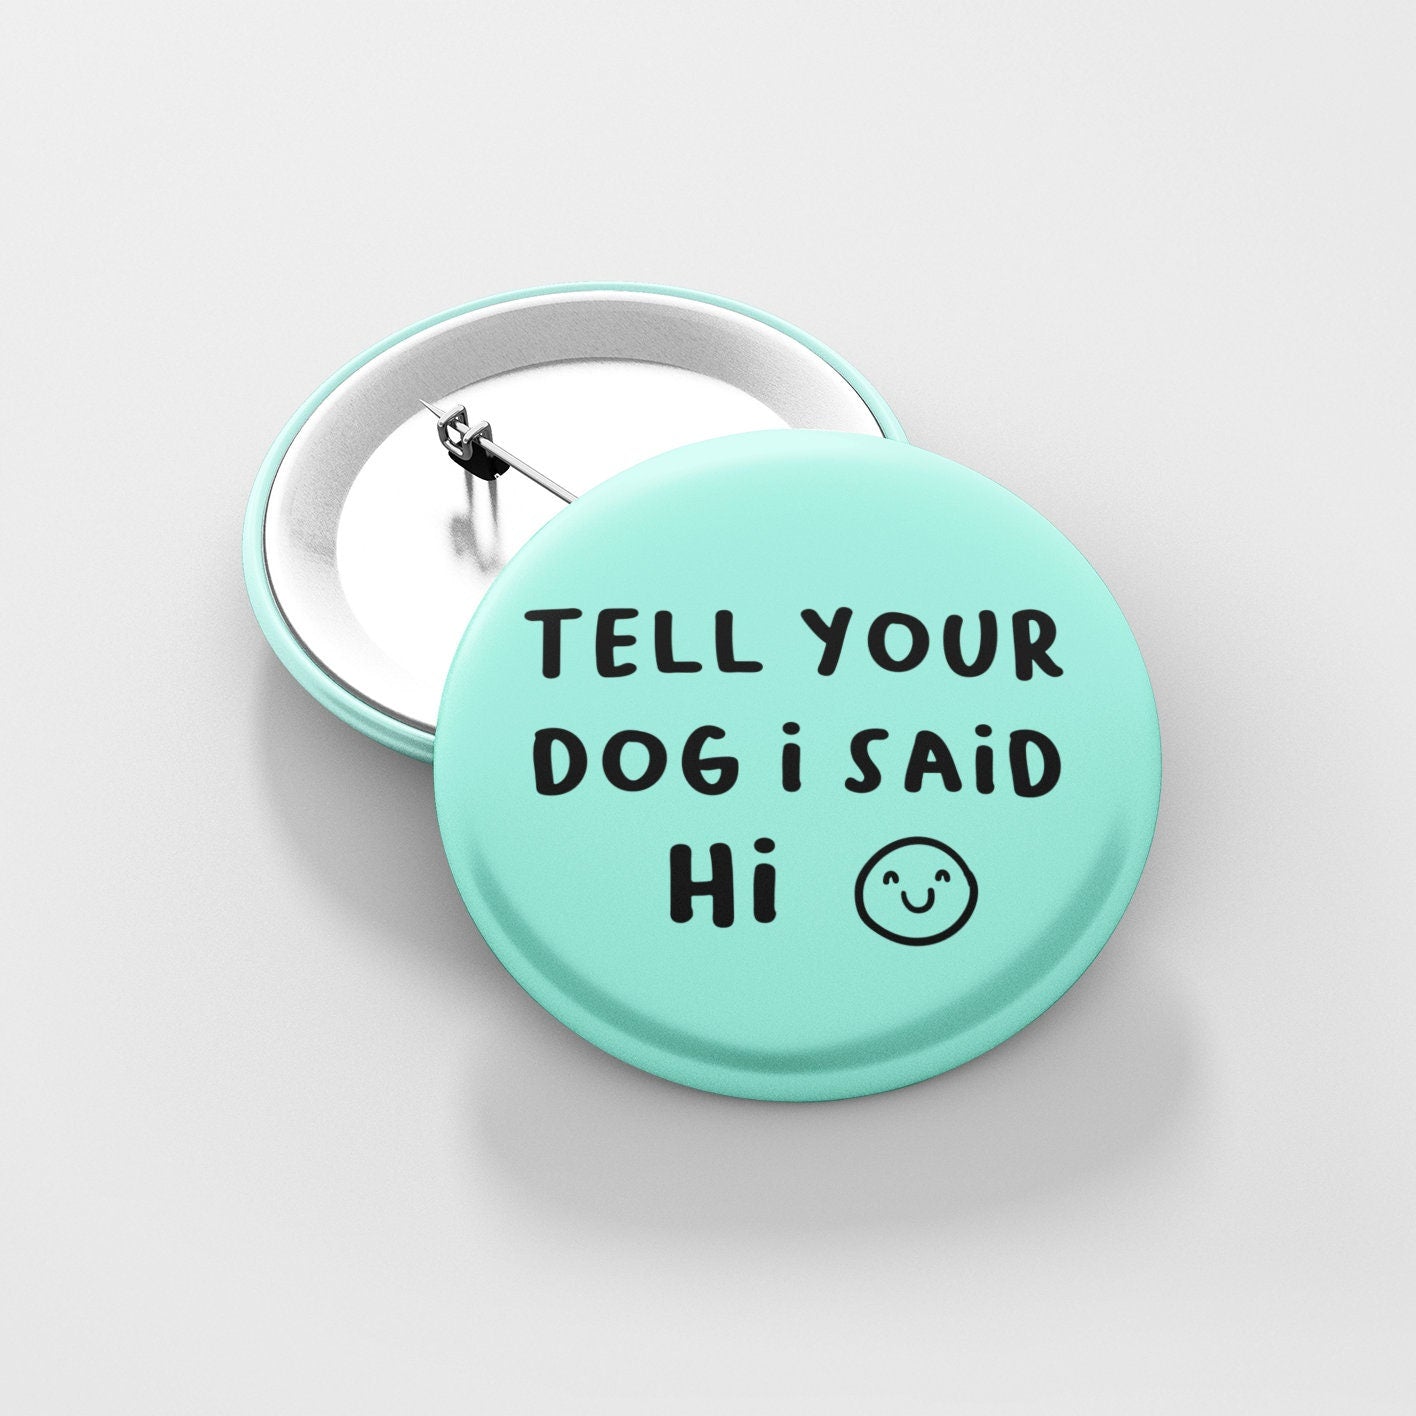 Tell Your Dog I Said Hi Badge | Cute Dog Pin - Dog Lover Gifts - Animal Lover - Quote Pin